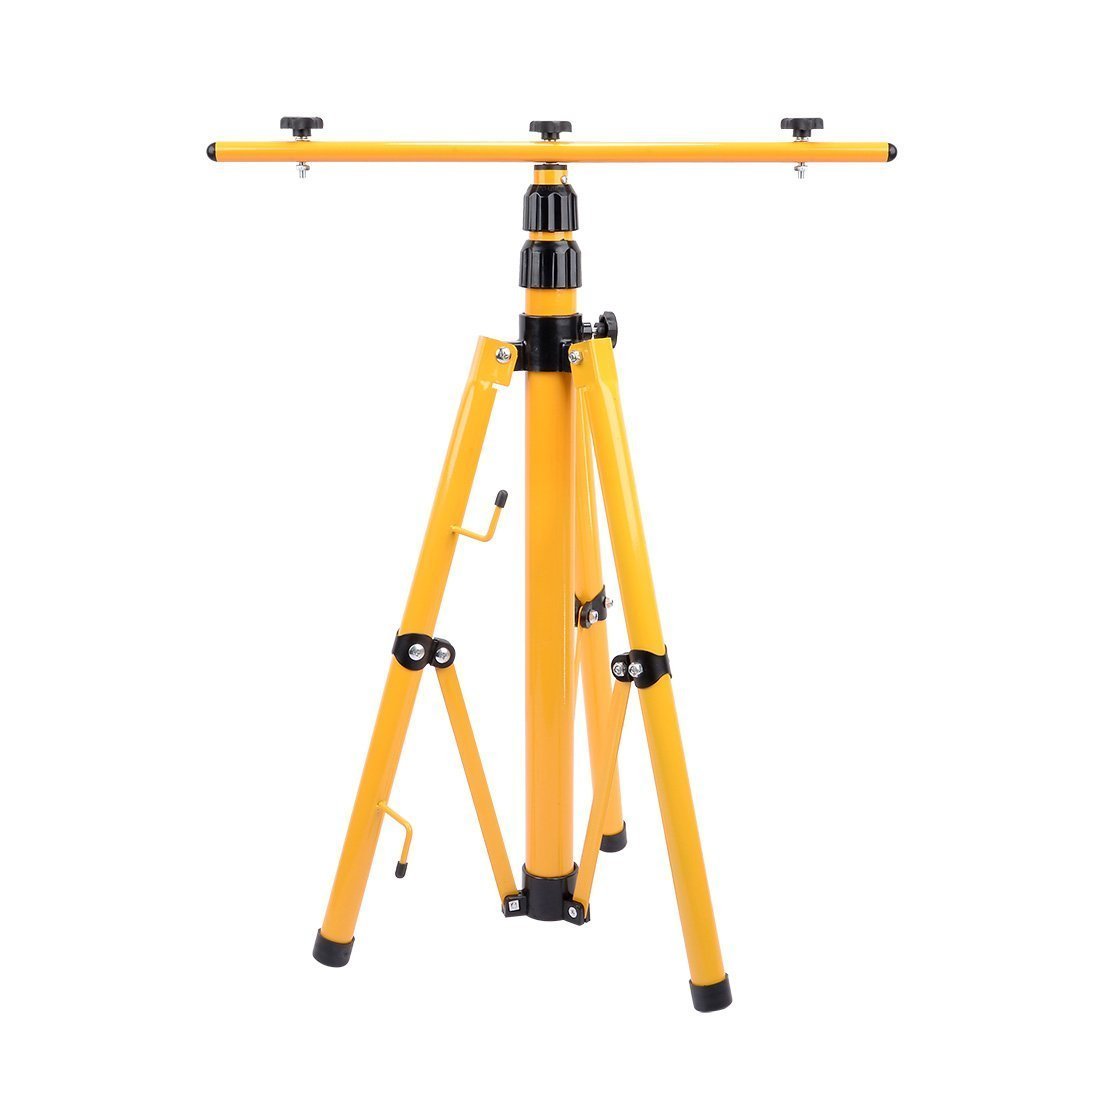 1M Adjustable Double Head Flood Light Tripod Stand with 1 for 2 Connector